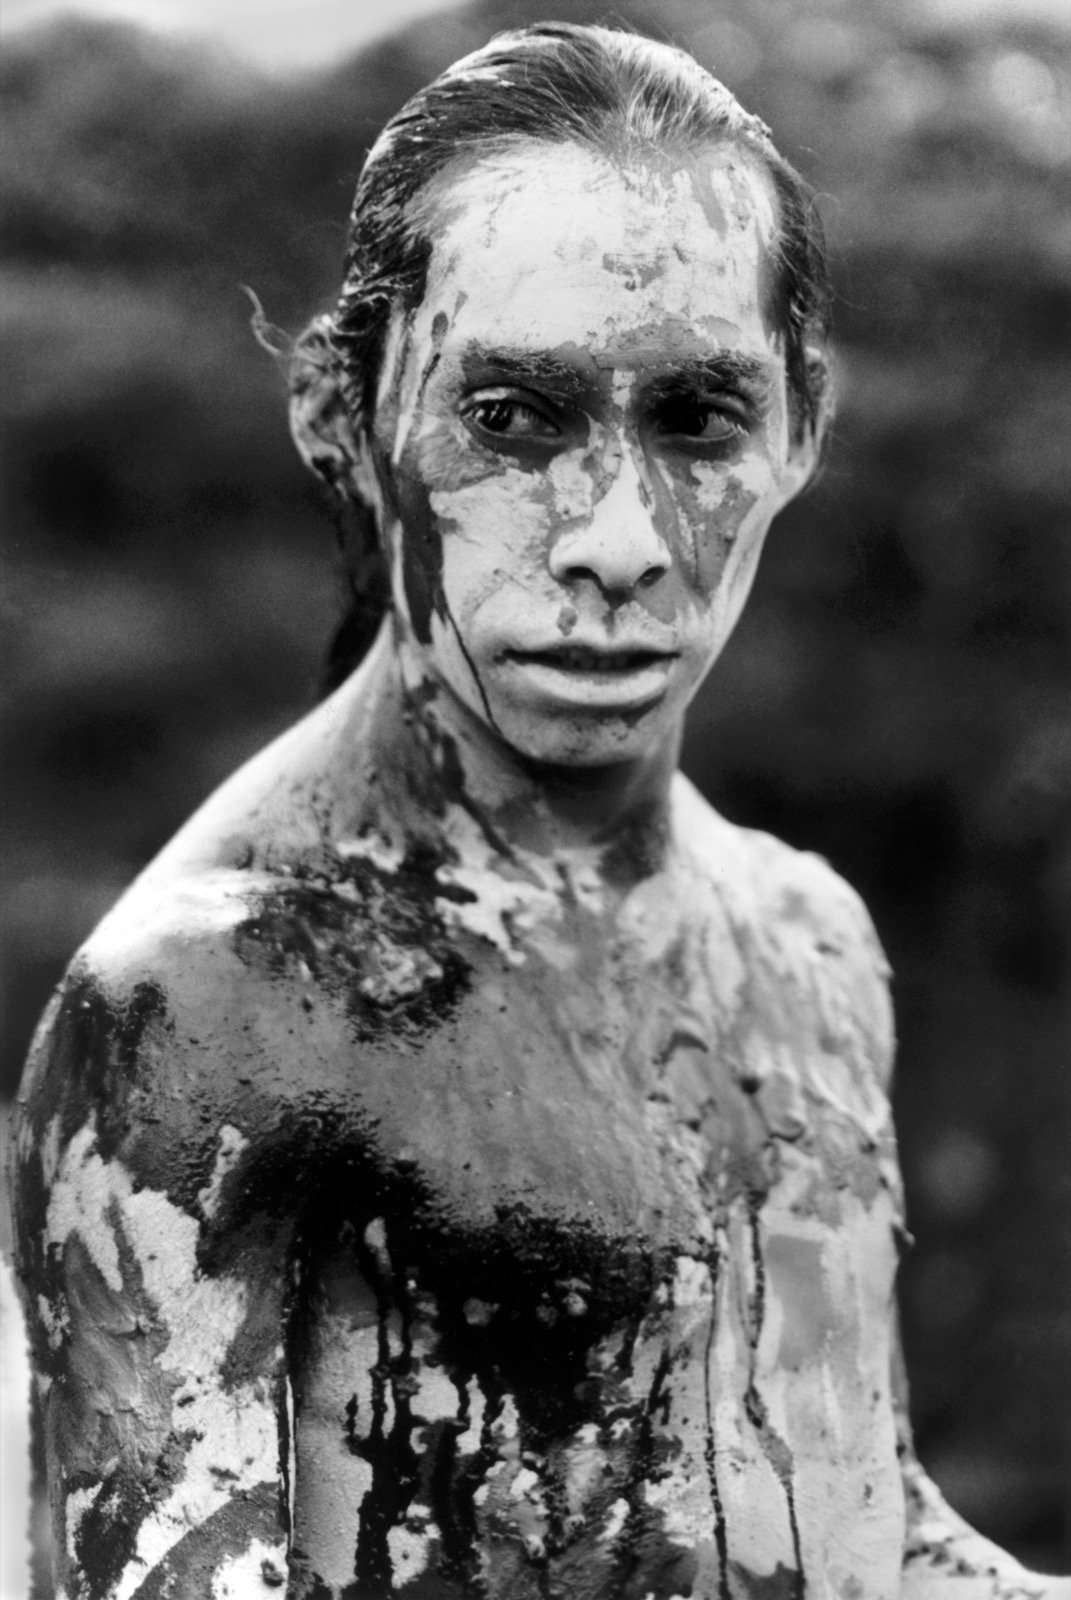   Topiltzin the hero, the warrior, the mud-man, the tlahcuilo (sacred scribe/painter), the unrecognized symbol of a nation. What is he thinking of? No one knows, not even Damián (I asked him). This photograph is the perfect metaphor for one of the ma